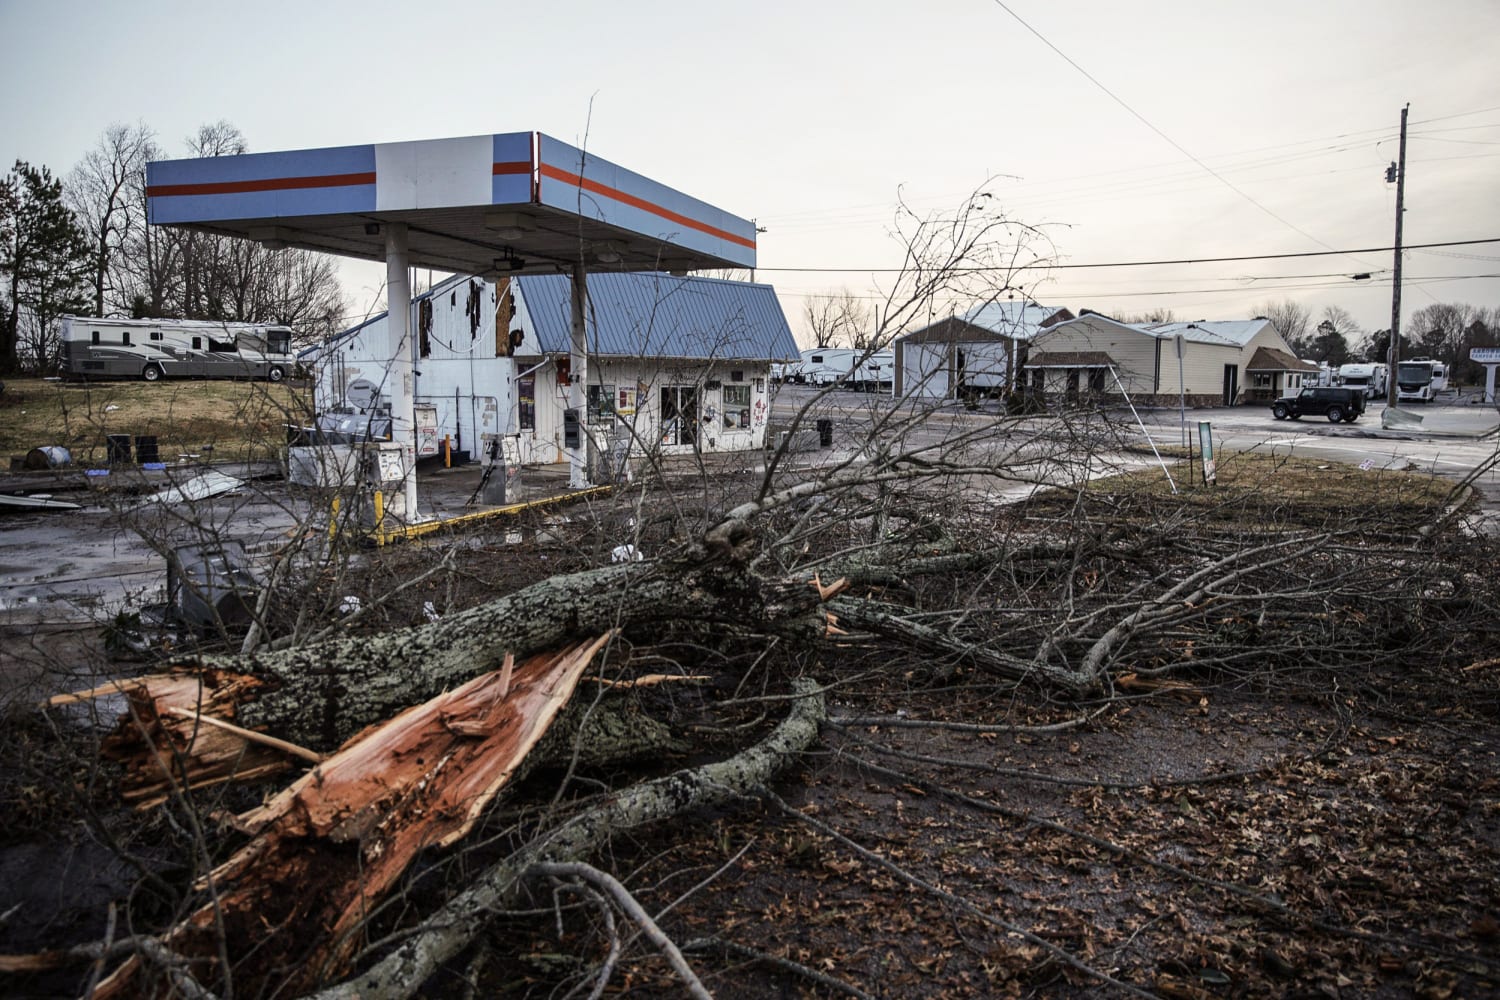 At least 50 feared dead in Kentucky as tornadoes rip through swaths of U.S.